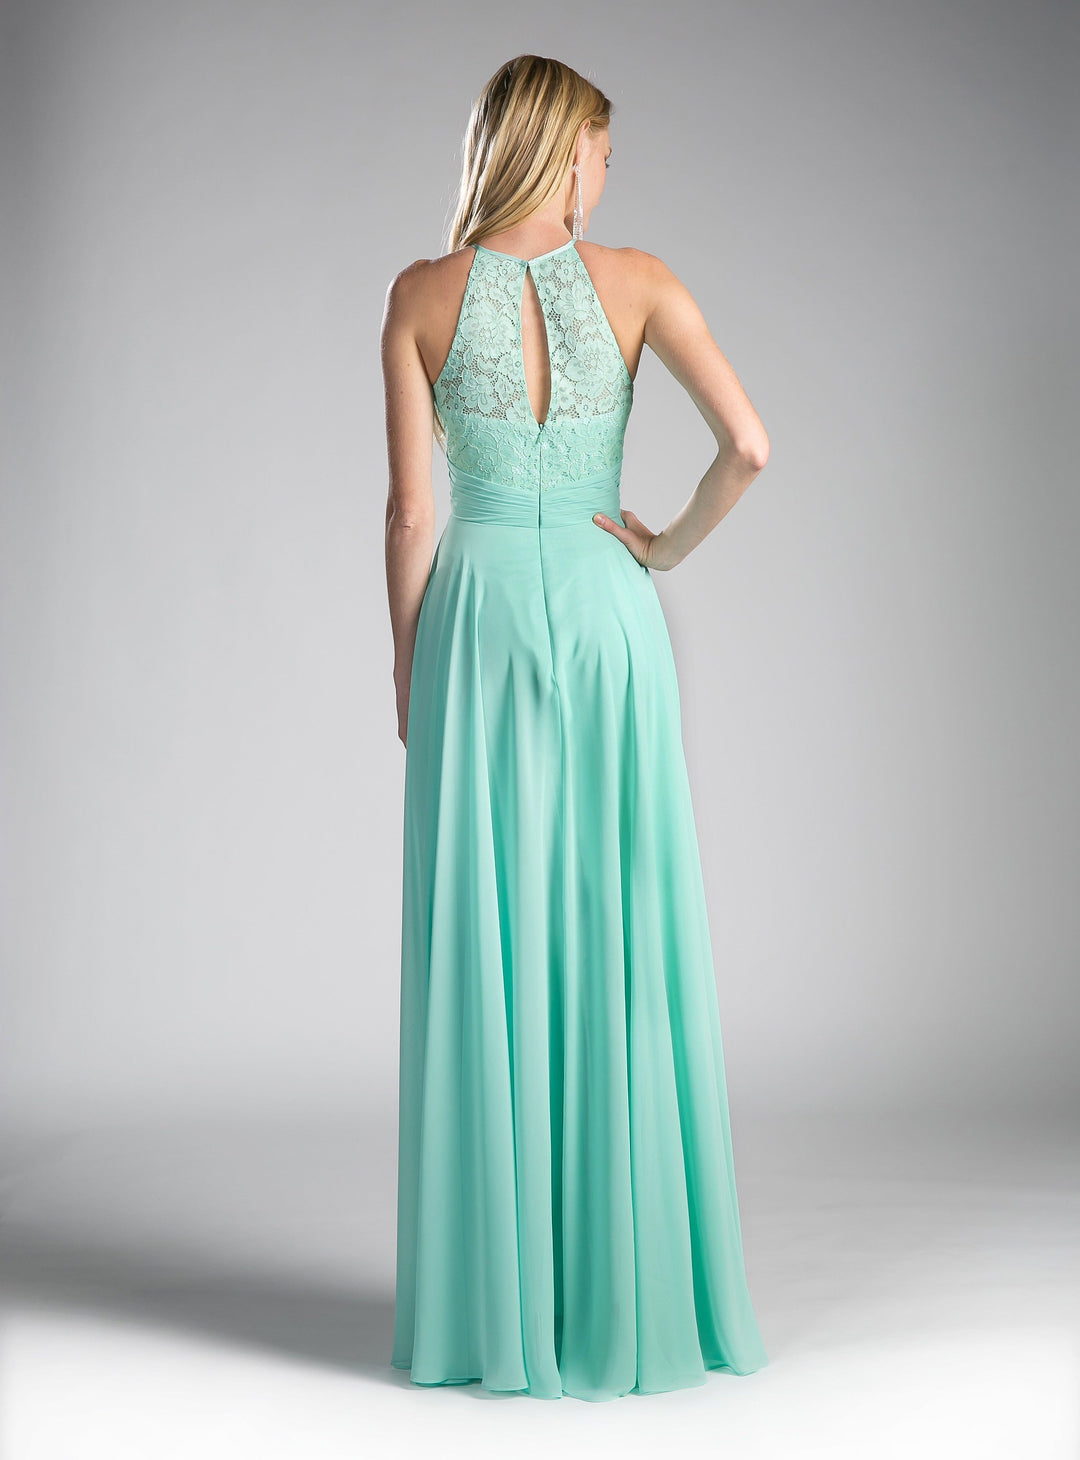 Long Halter Dress with Lace Bodice by Cinderella Divine CJ228-Long Formal Dresses-ABC Fashion